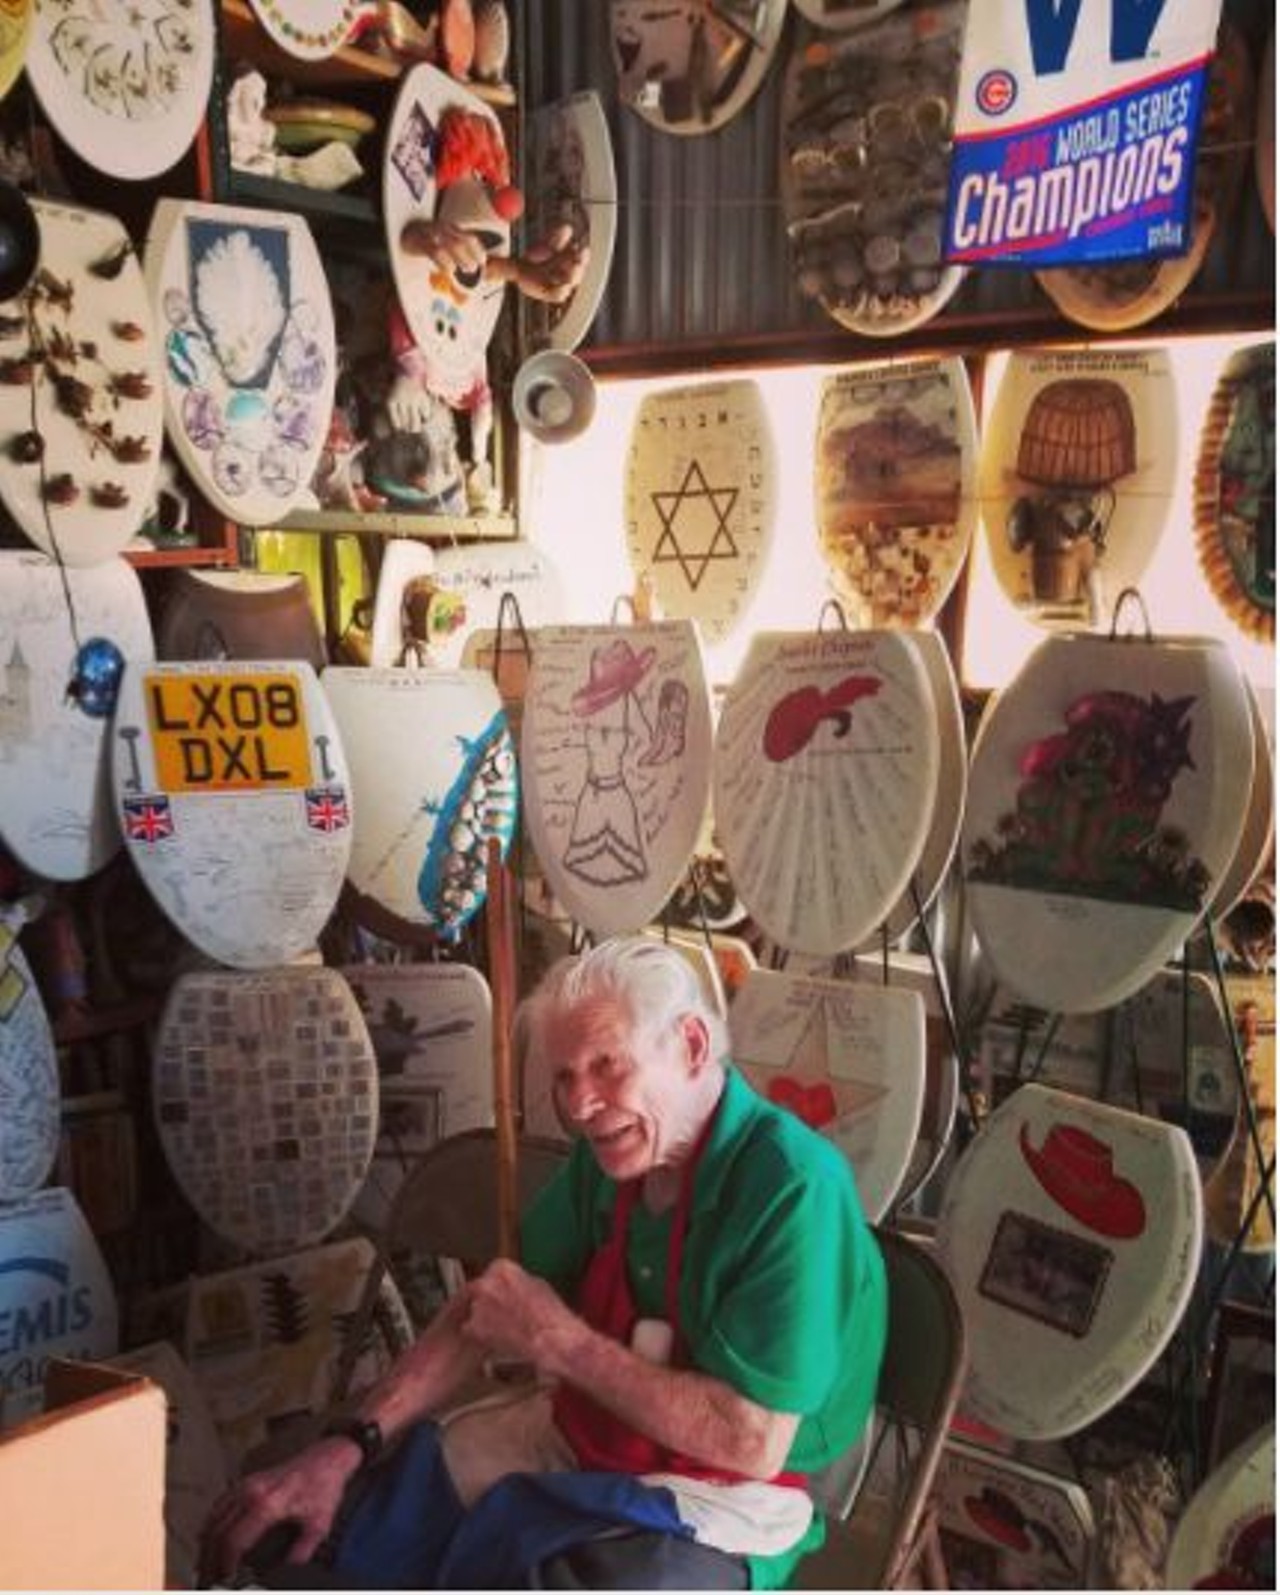 Barney Smith Toilet Museum
(210) 824-7791, 239 Abiso Ave,
facebook.com/pg/SATXTSAM
If you want a different kind of art then checkout this free museum of charming toilet seats.
Photo via Instagram 
laura.kimsperl
